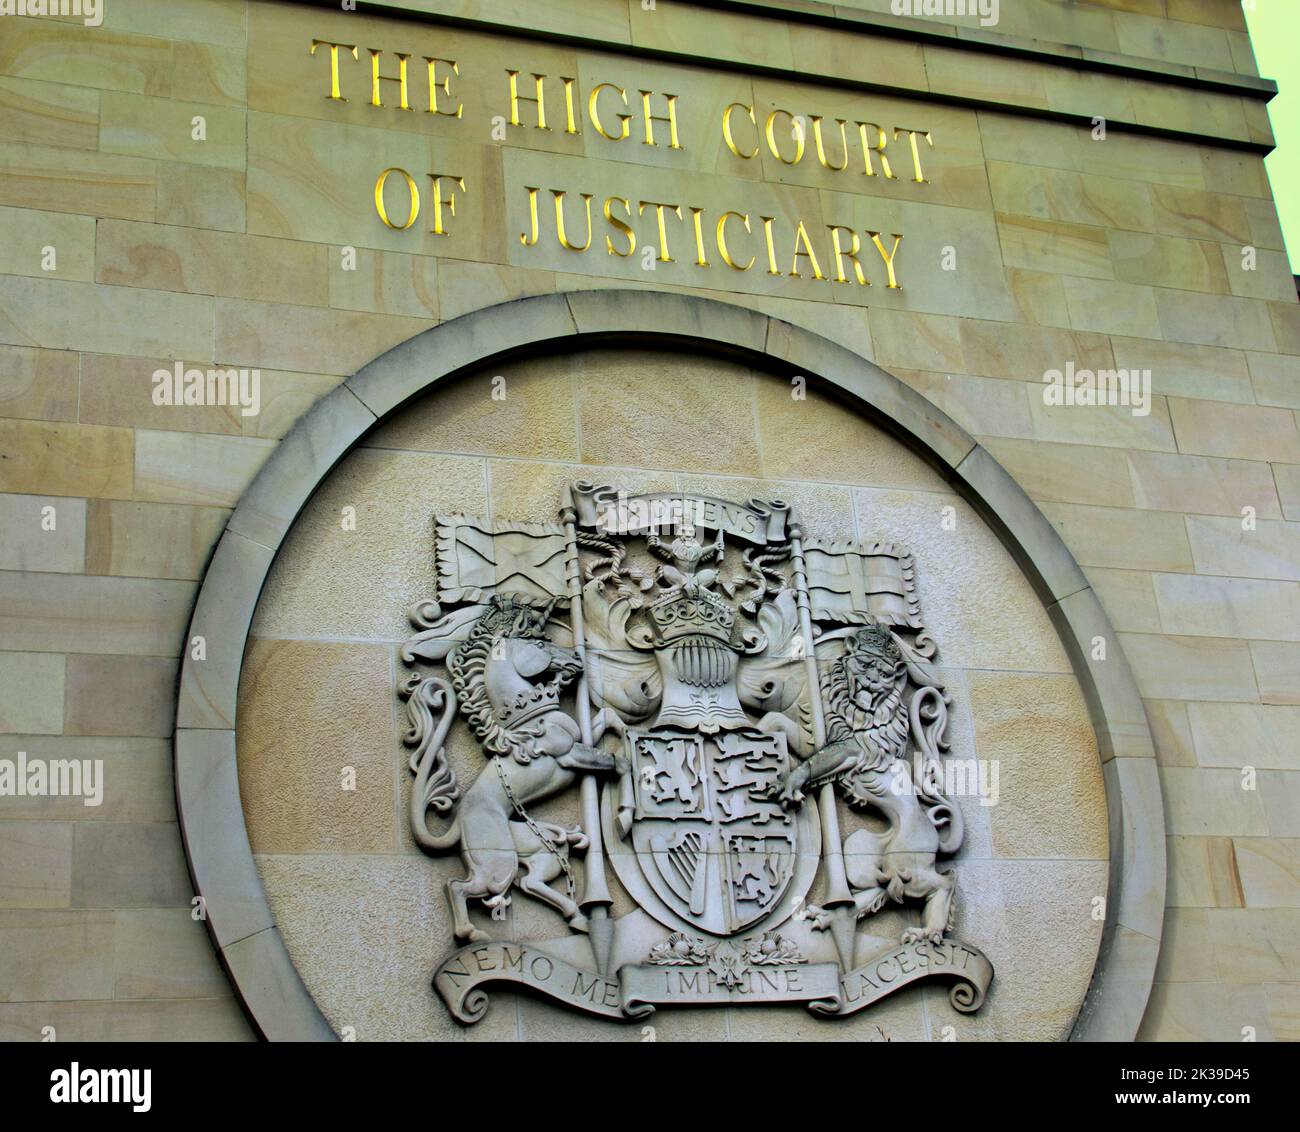 The High Court of Justiciary, front sign, Glasgow, Scotland, UK Stock Photo